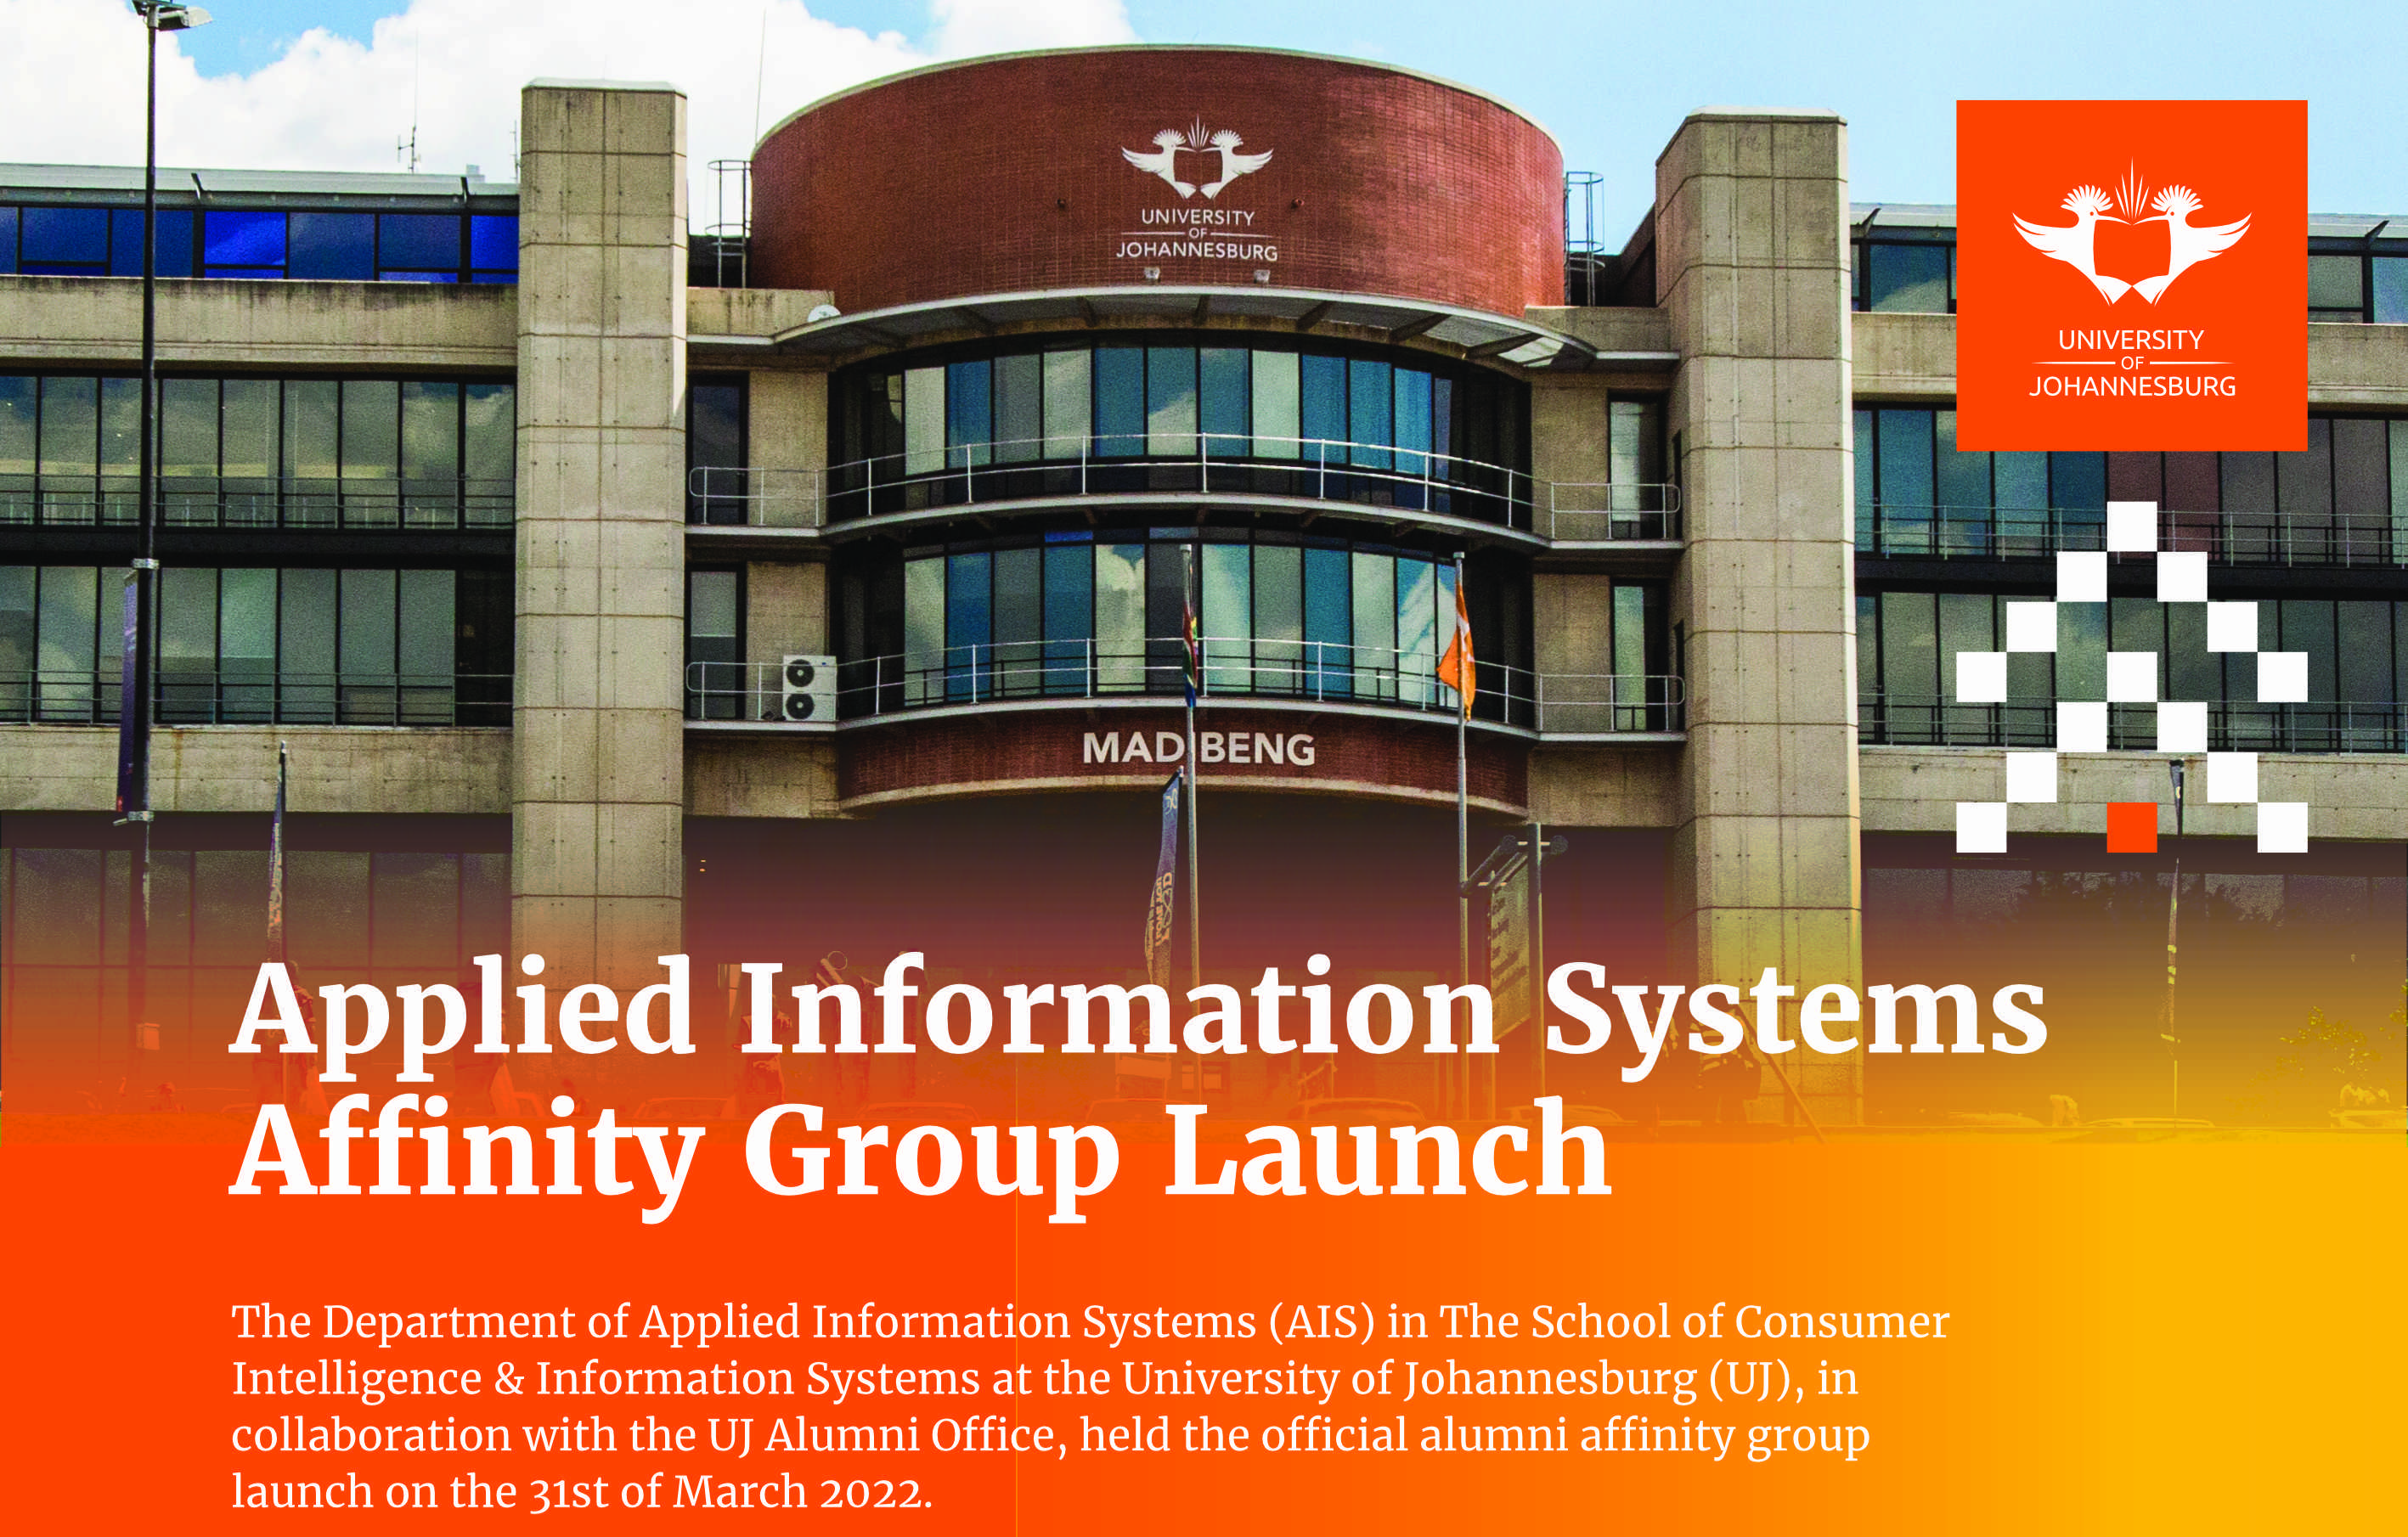 Ais Affinity Group Launch Website Image